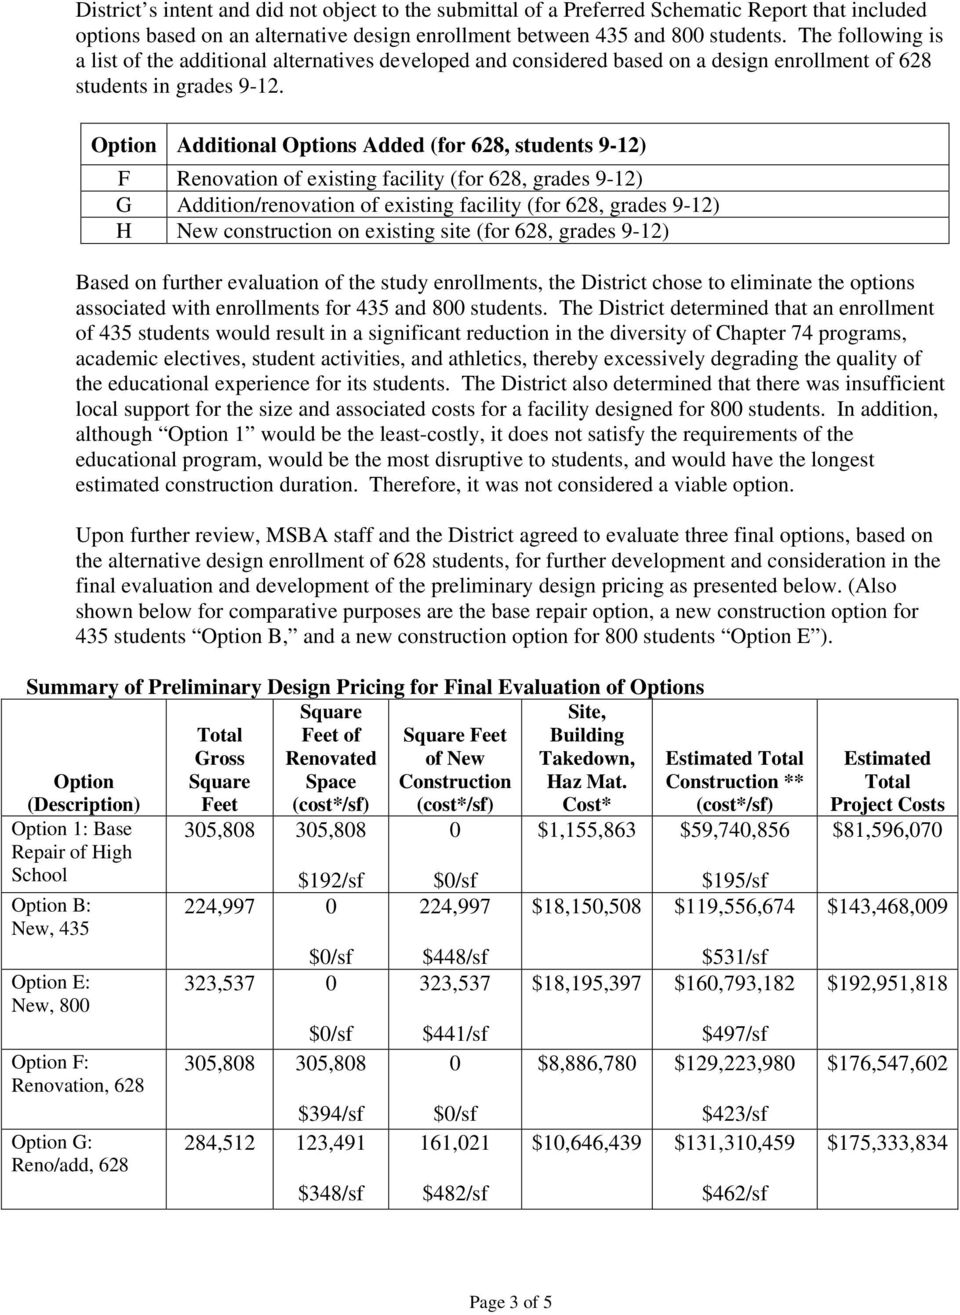 Option Additional Options Added (for 628, students 9-12) F Renovation of existing facility (for 628, grades 9-12) G Addition/renovation of existing facility (for 628, grades 9-12) H New construction